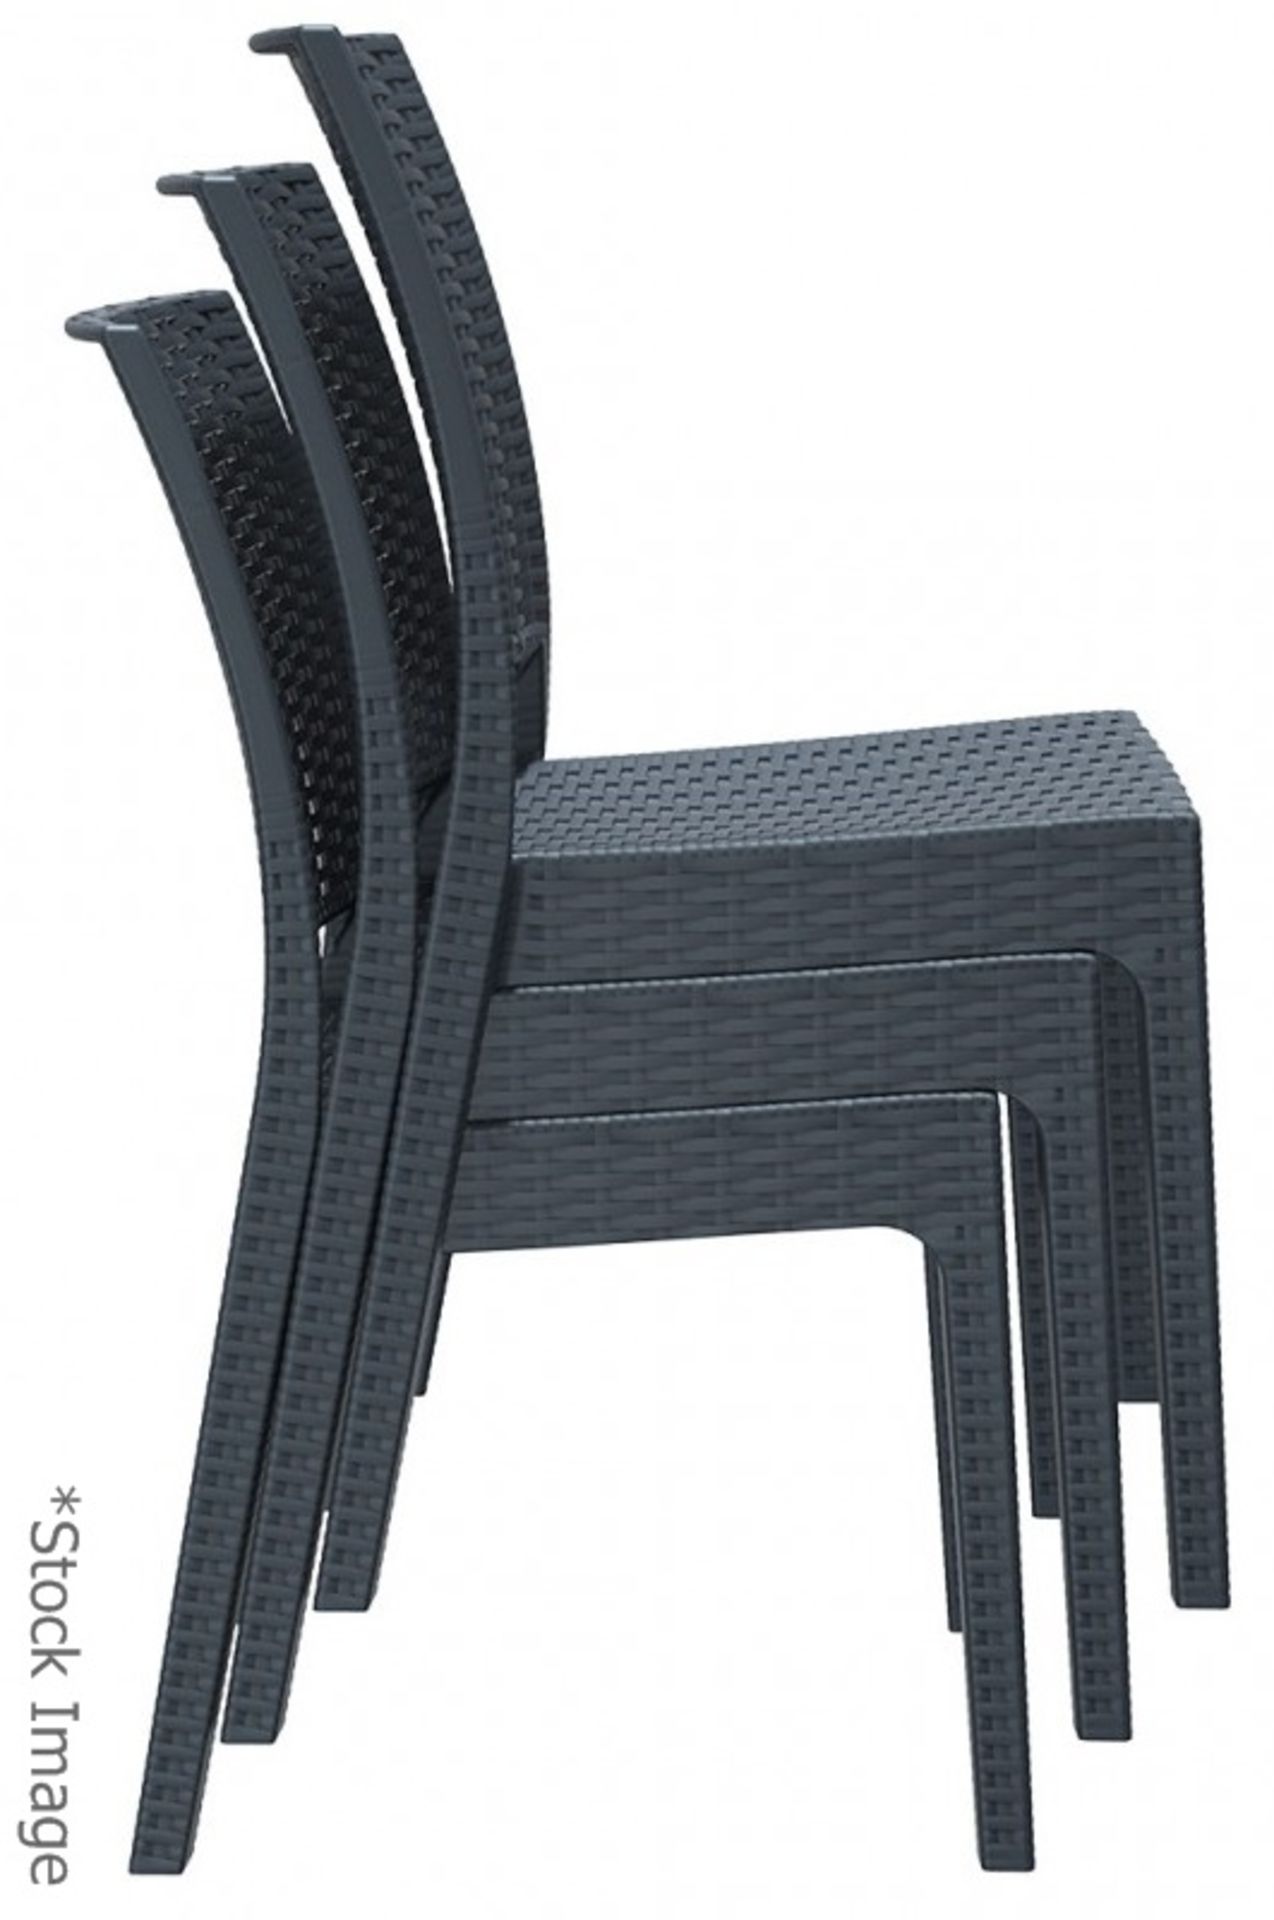 8 x SIESTA EXCLUSIVE 'Florida' Commercial Stackable Rattan-style Chairs In Dark Grey -CL987 - - Image 7 of 13